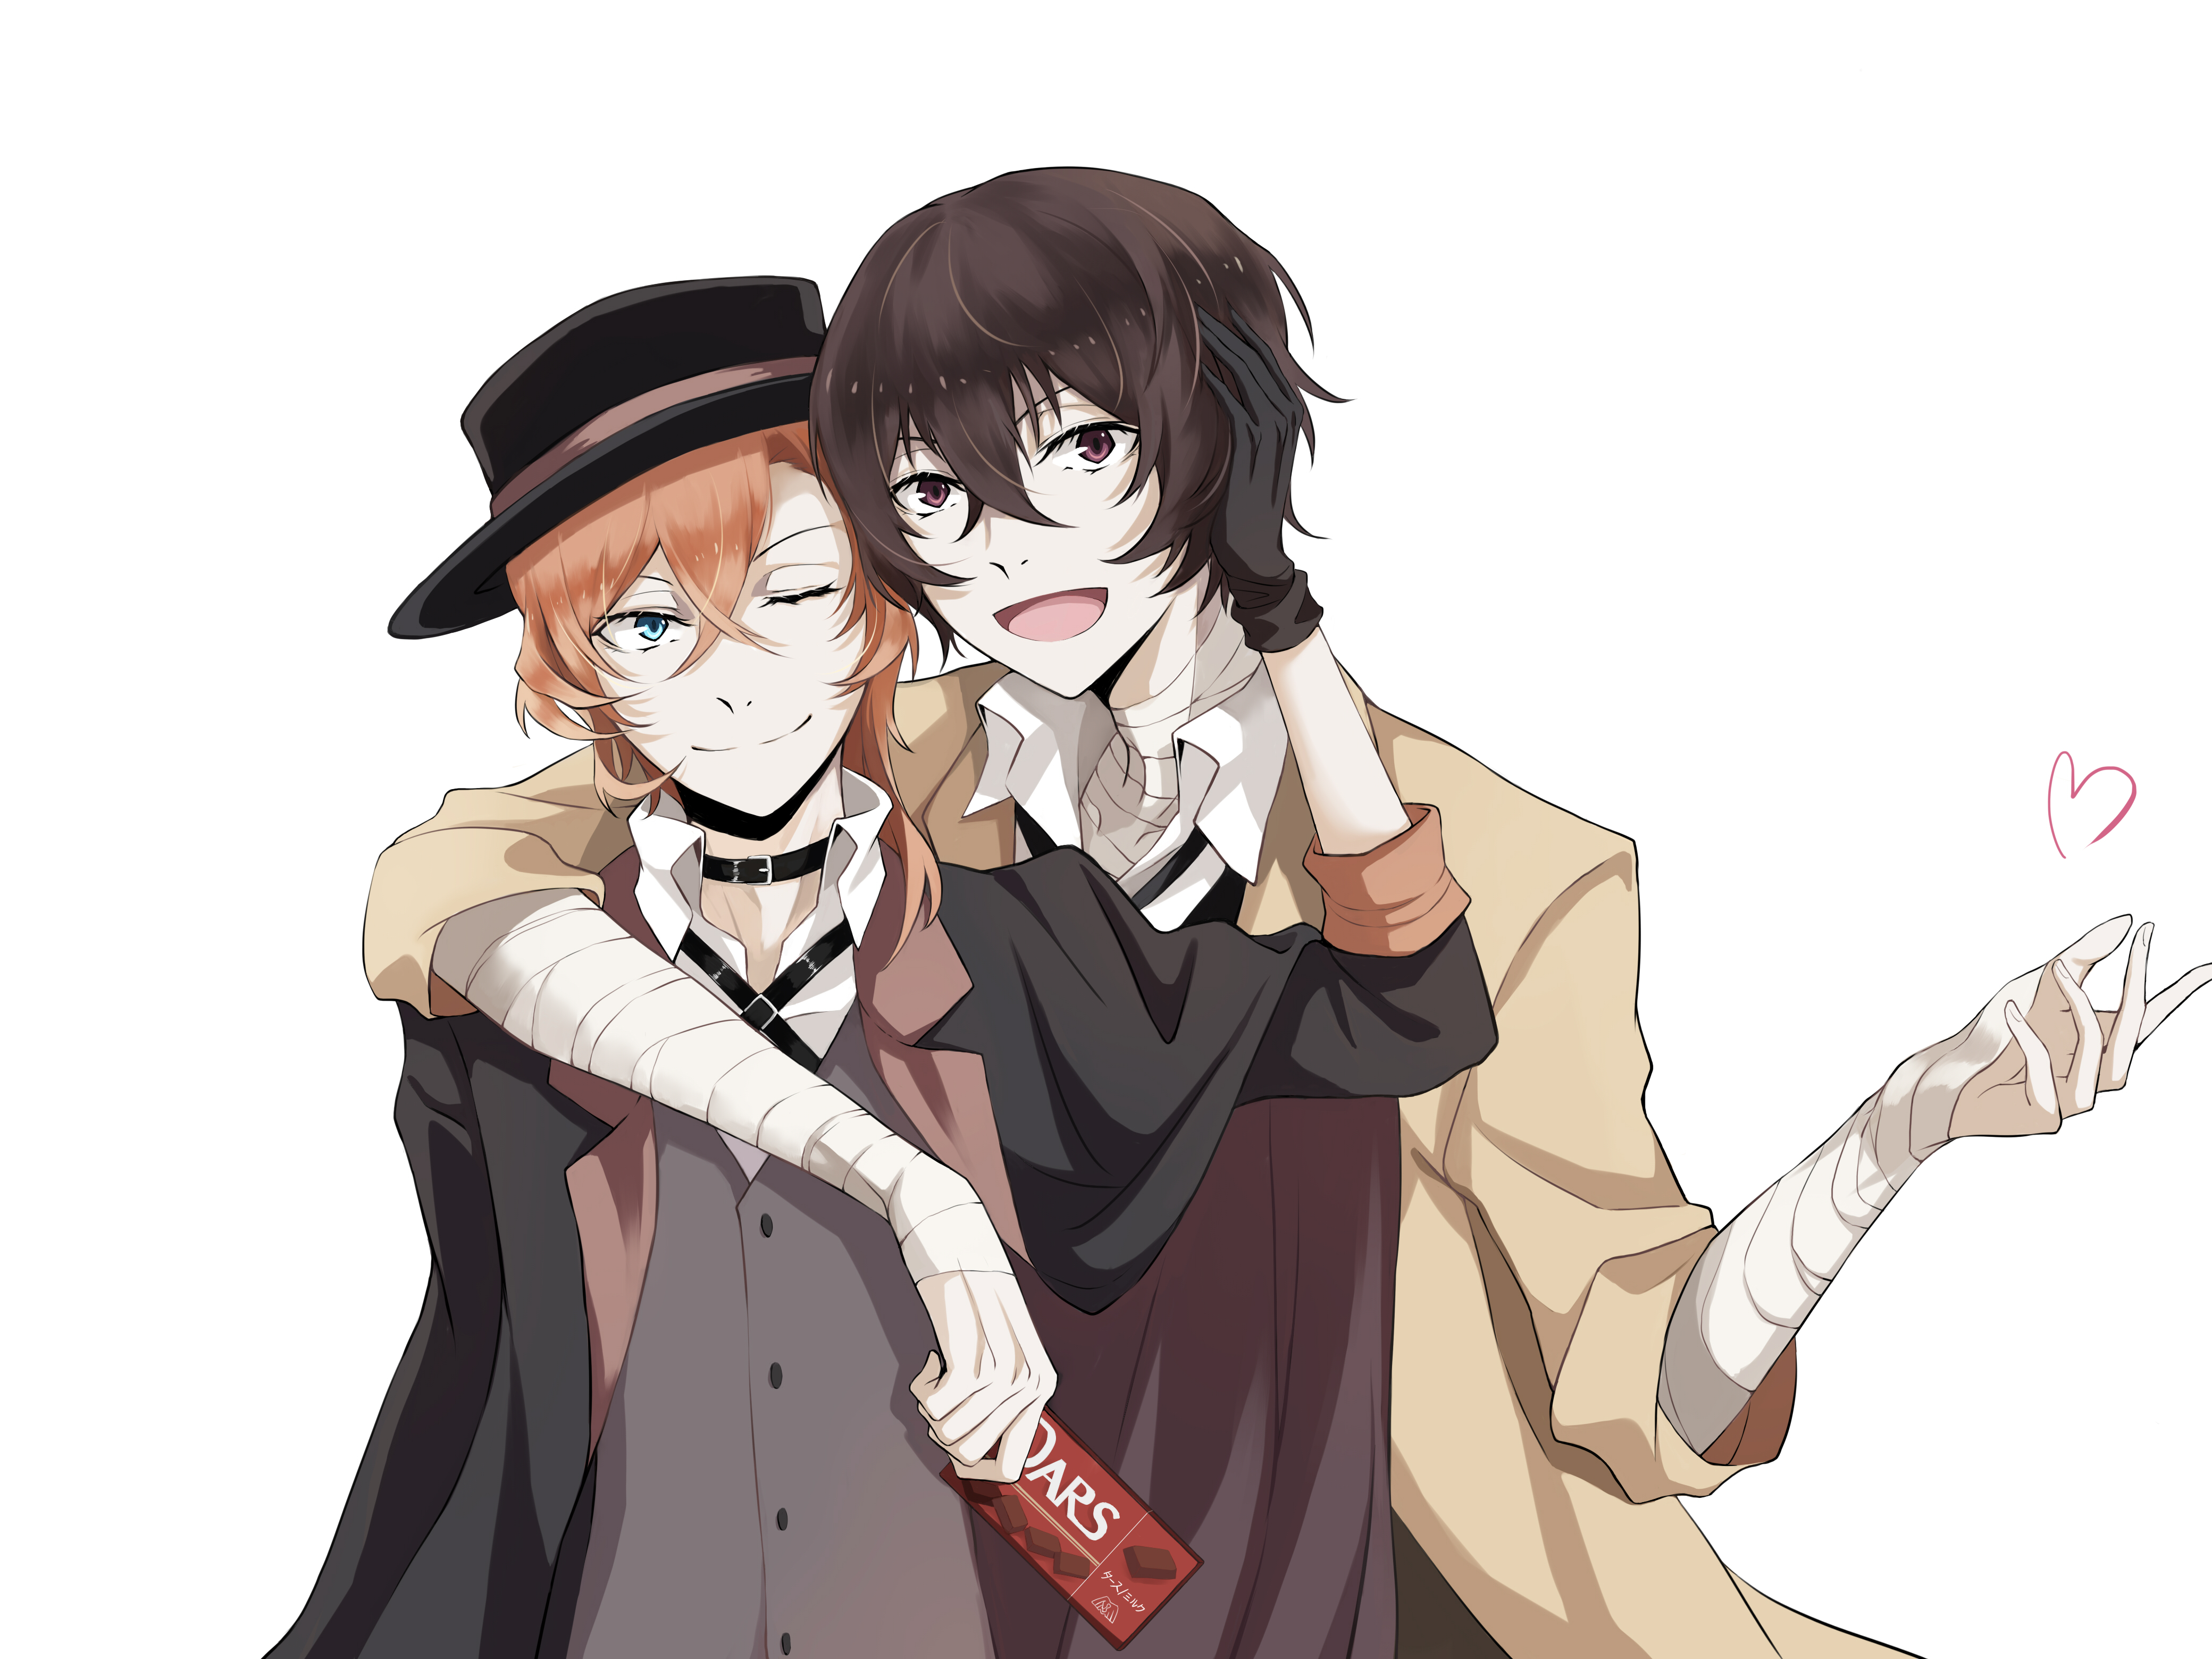 Dazai and Chuuya wallpaper by SomniArts  Download on ZEDGE  f5d2